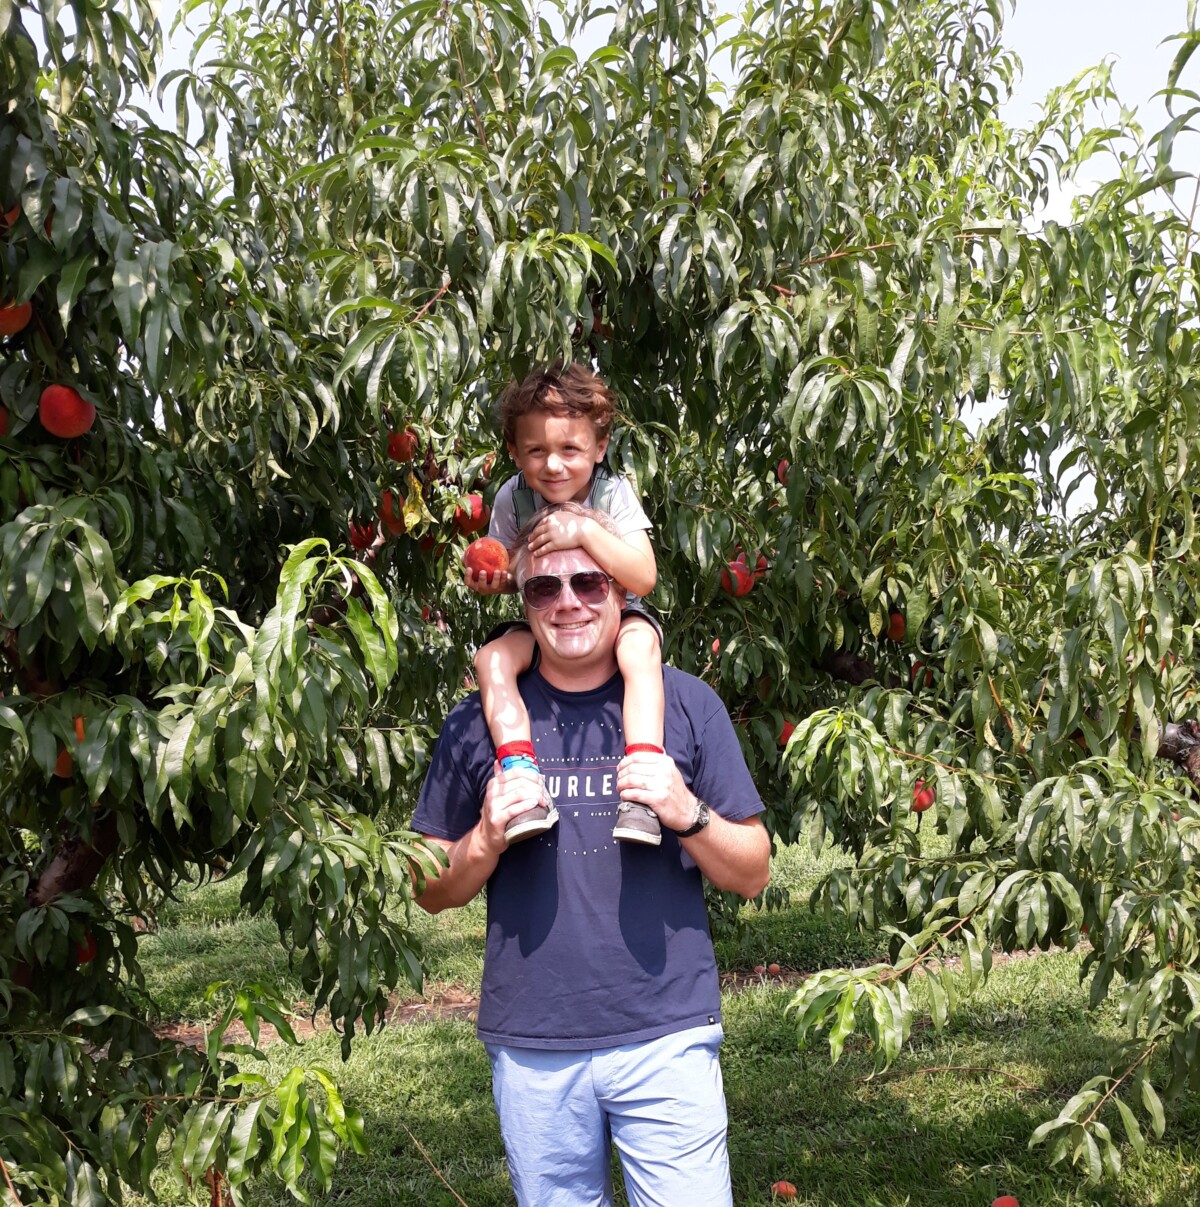 We love to pick fruit at the orchard